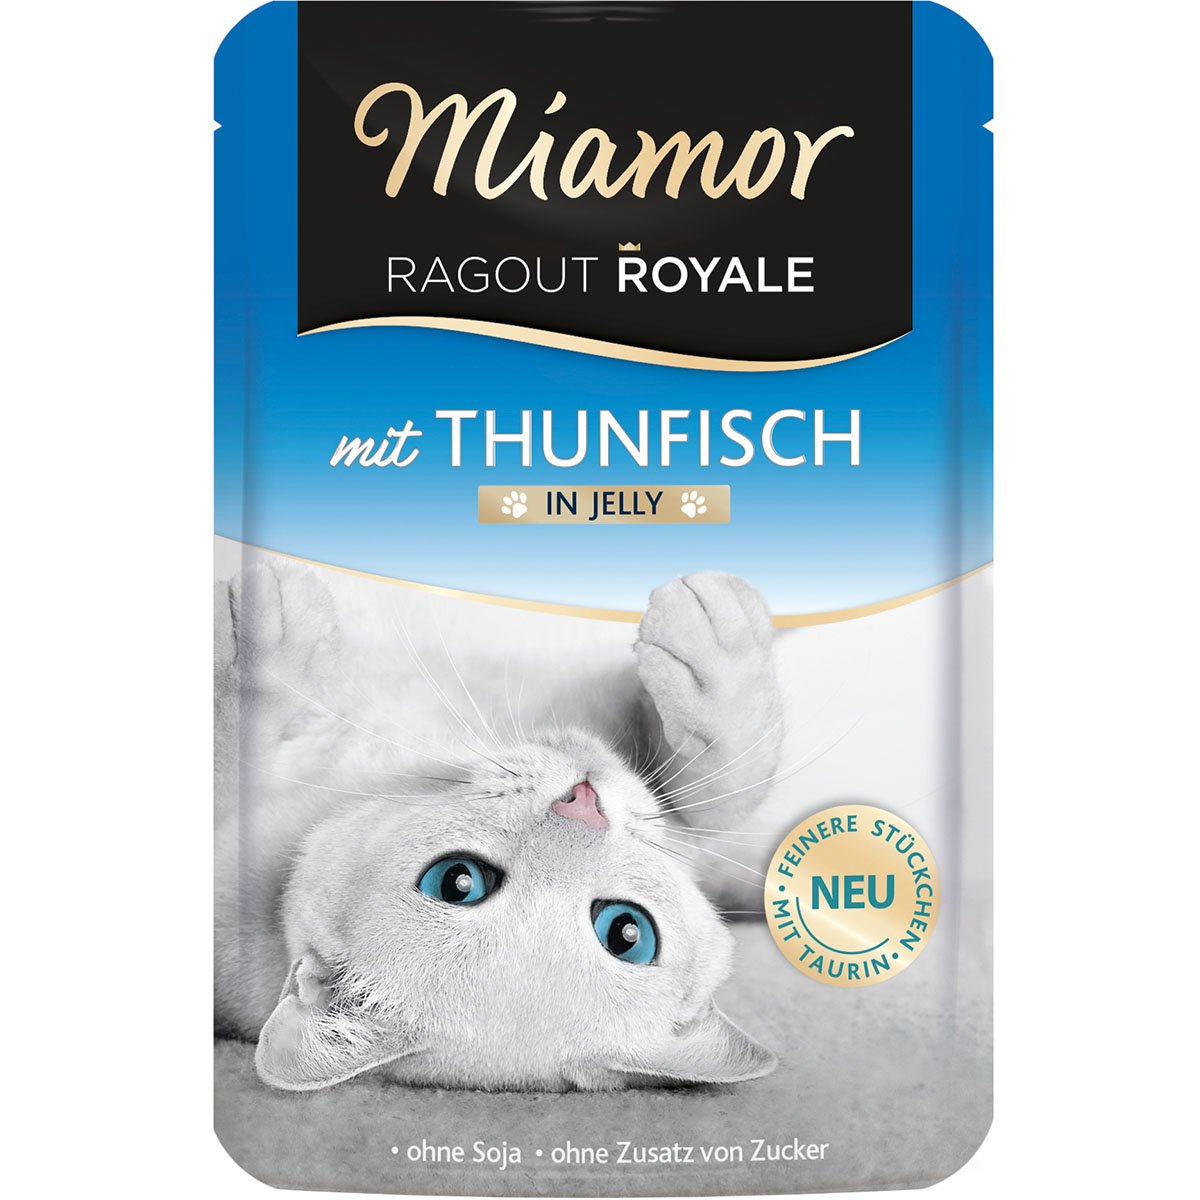 Miamor Ragout Royale Thunfisch in Jelly 44x100g